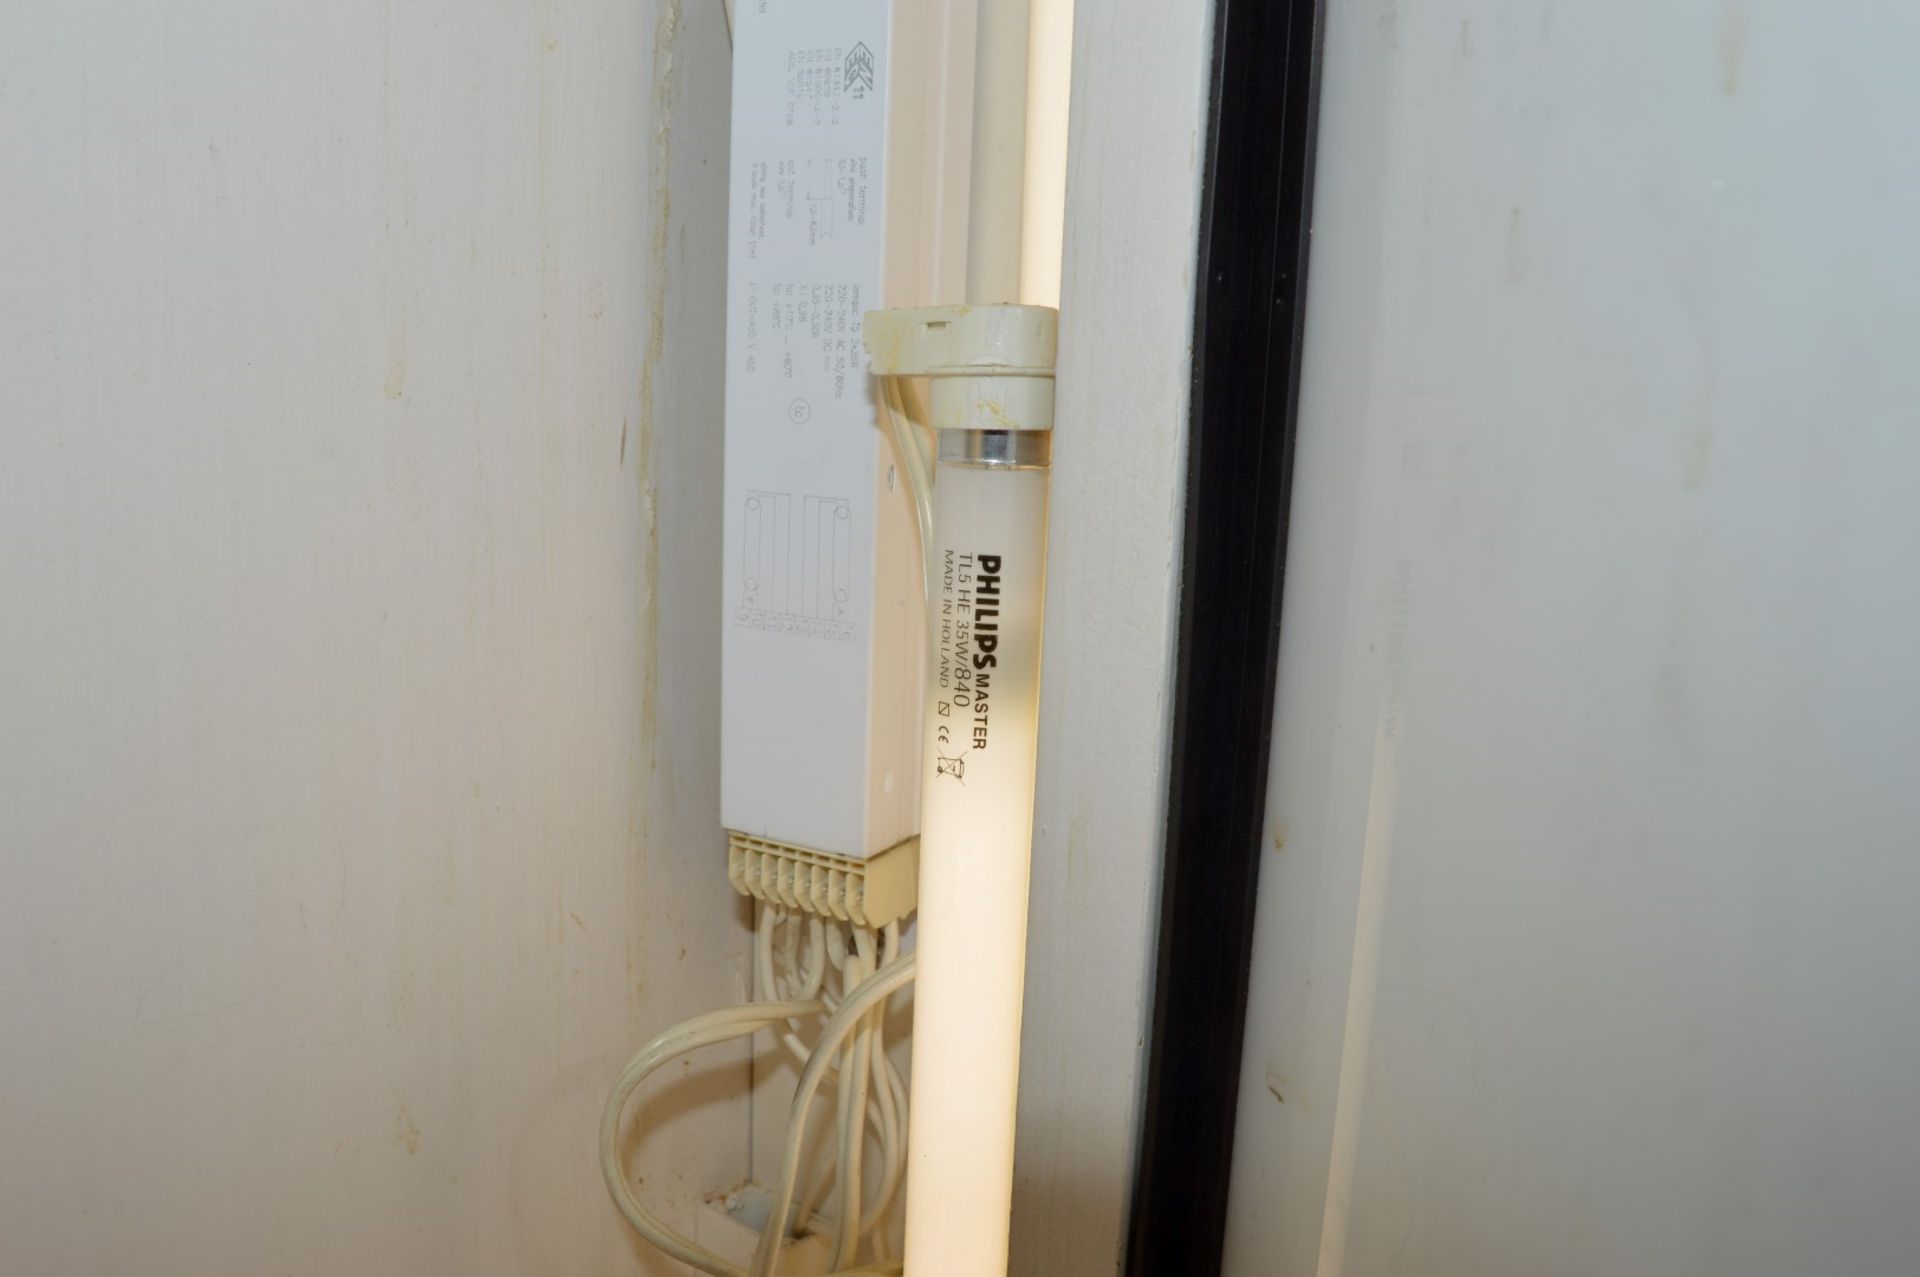 17 x Recessed Wall Light Fittings - Includes 34 x Tridonic Ballasts, Approx 68 x Tube Lights and - Image 12 of 15